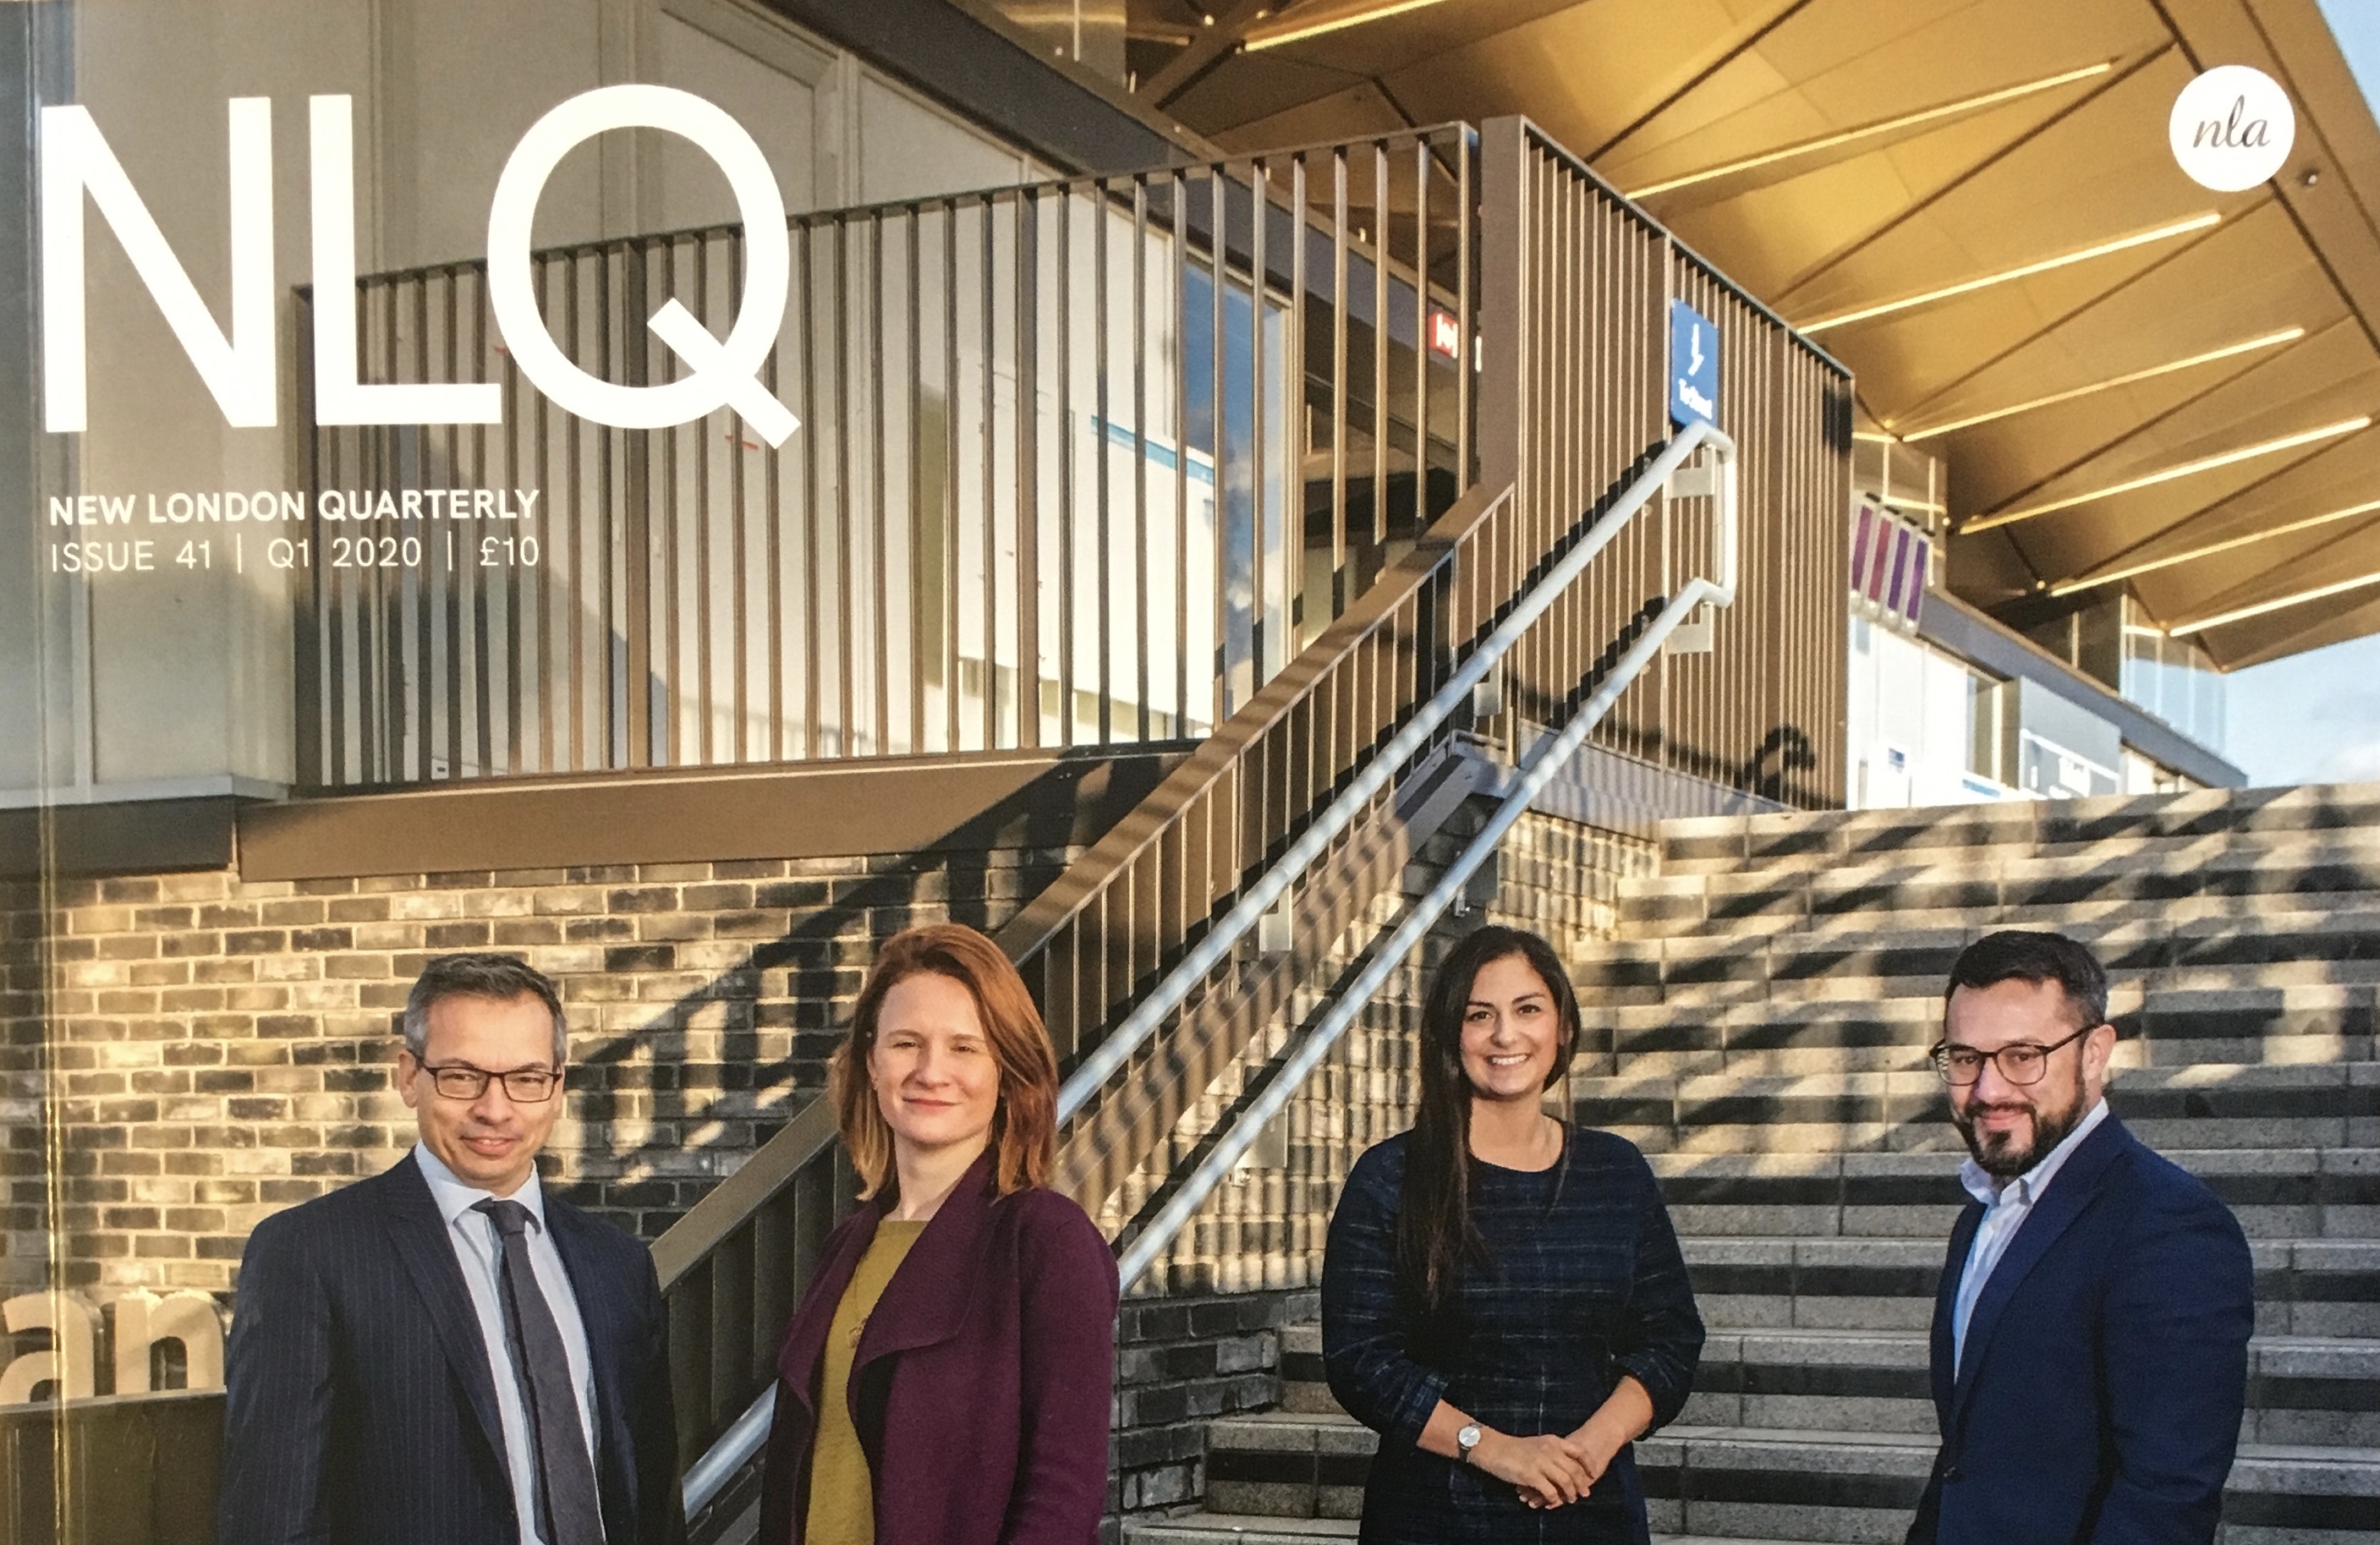 Front cover of New London Quarterly, winter issue, published Dec 2019, editor David Taylor, featuring (l-r) Enfield Council's Ian Davis (Chief Executive), Sarah Cary (Executive Director, Place), Nesil Caliskan (Leader) and Peter George (Programme Director - Meridian Water). Photo © Grant Smith.